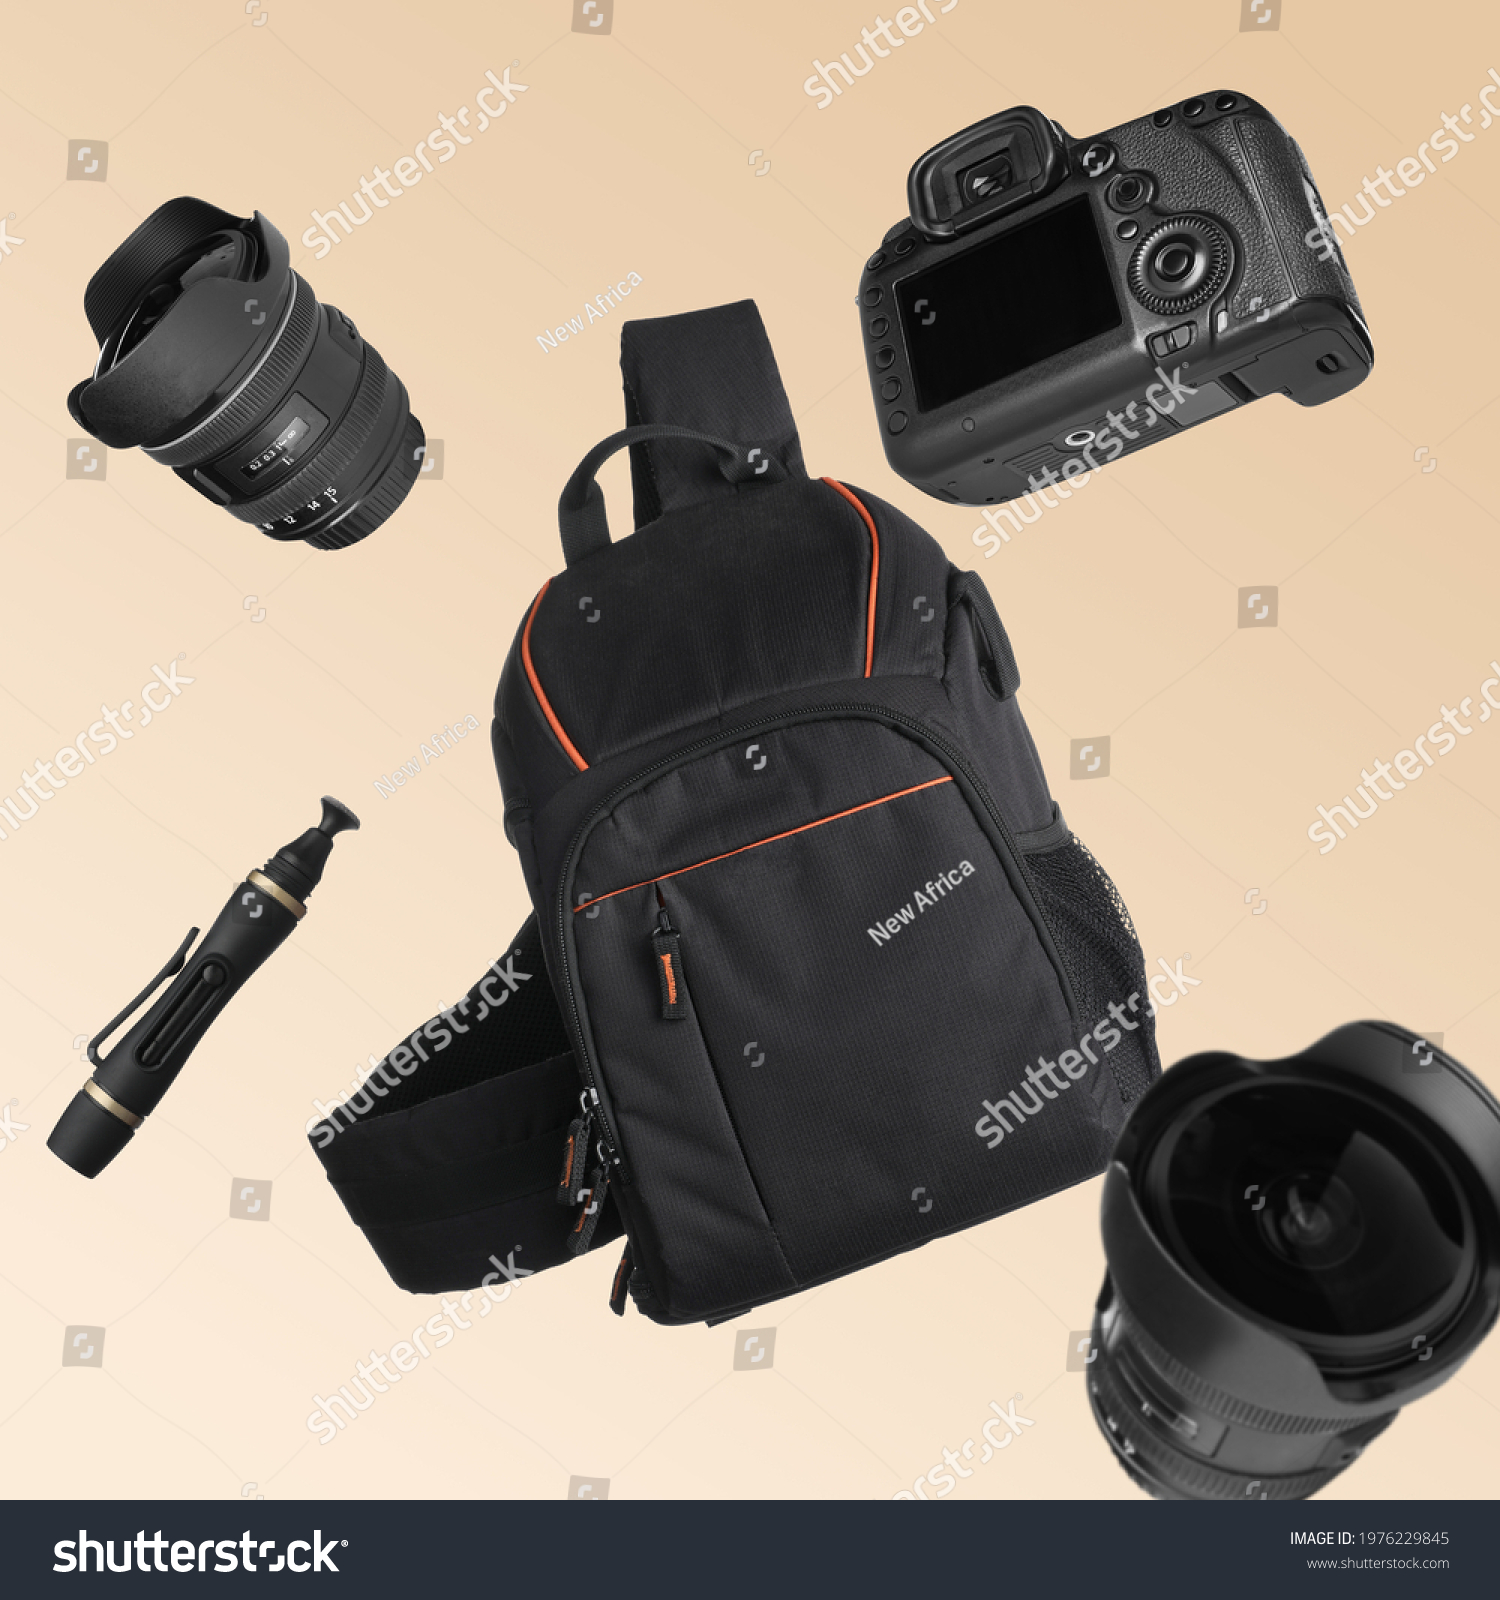 Different professional photography equipment falling on beige background #1976229845